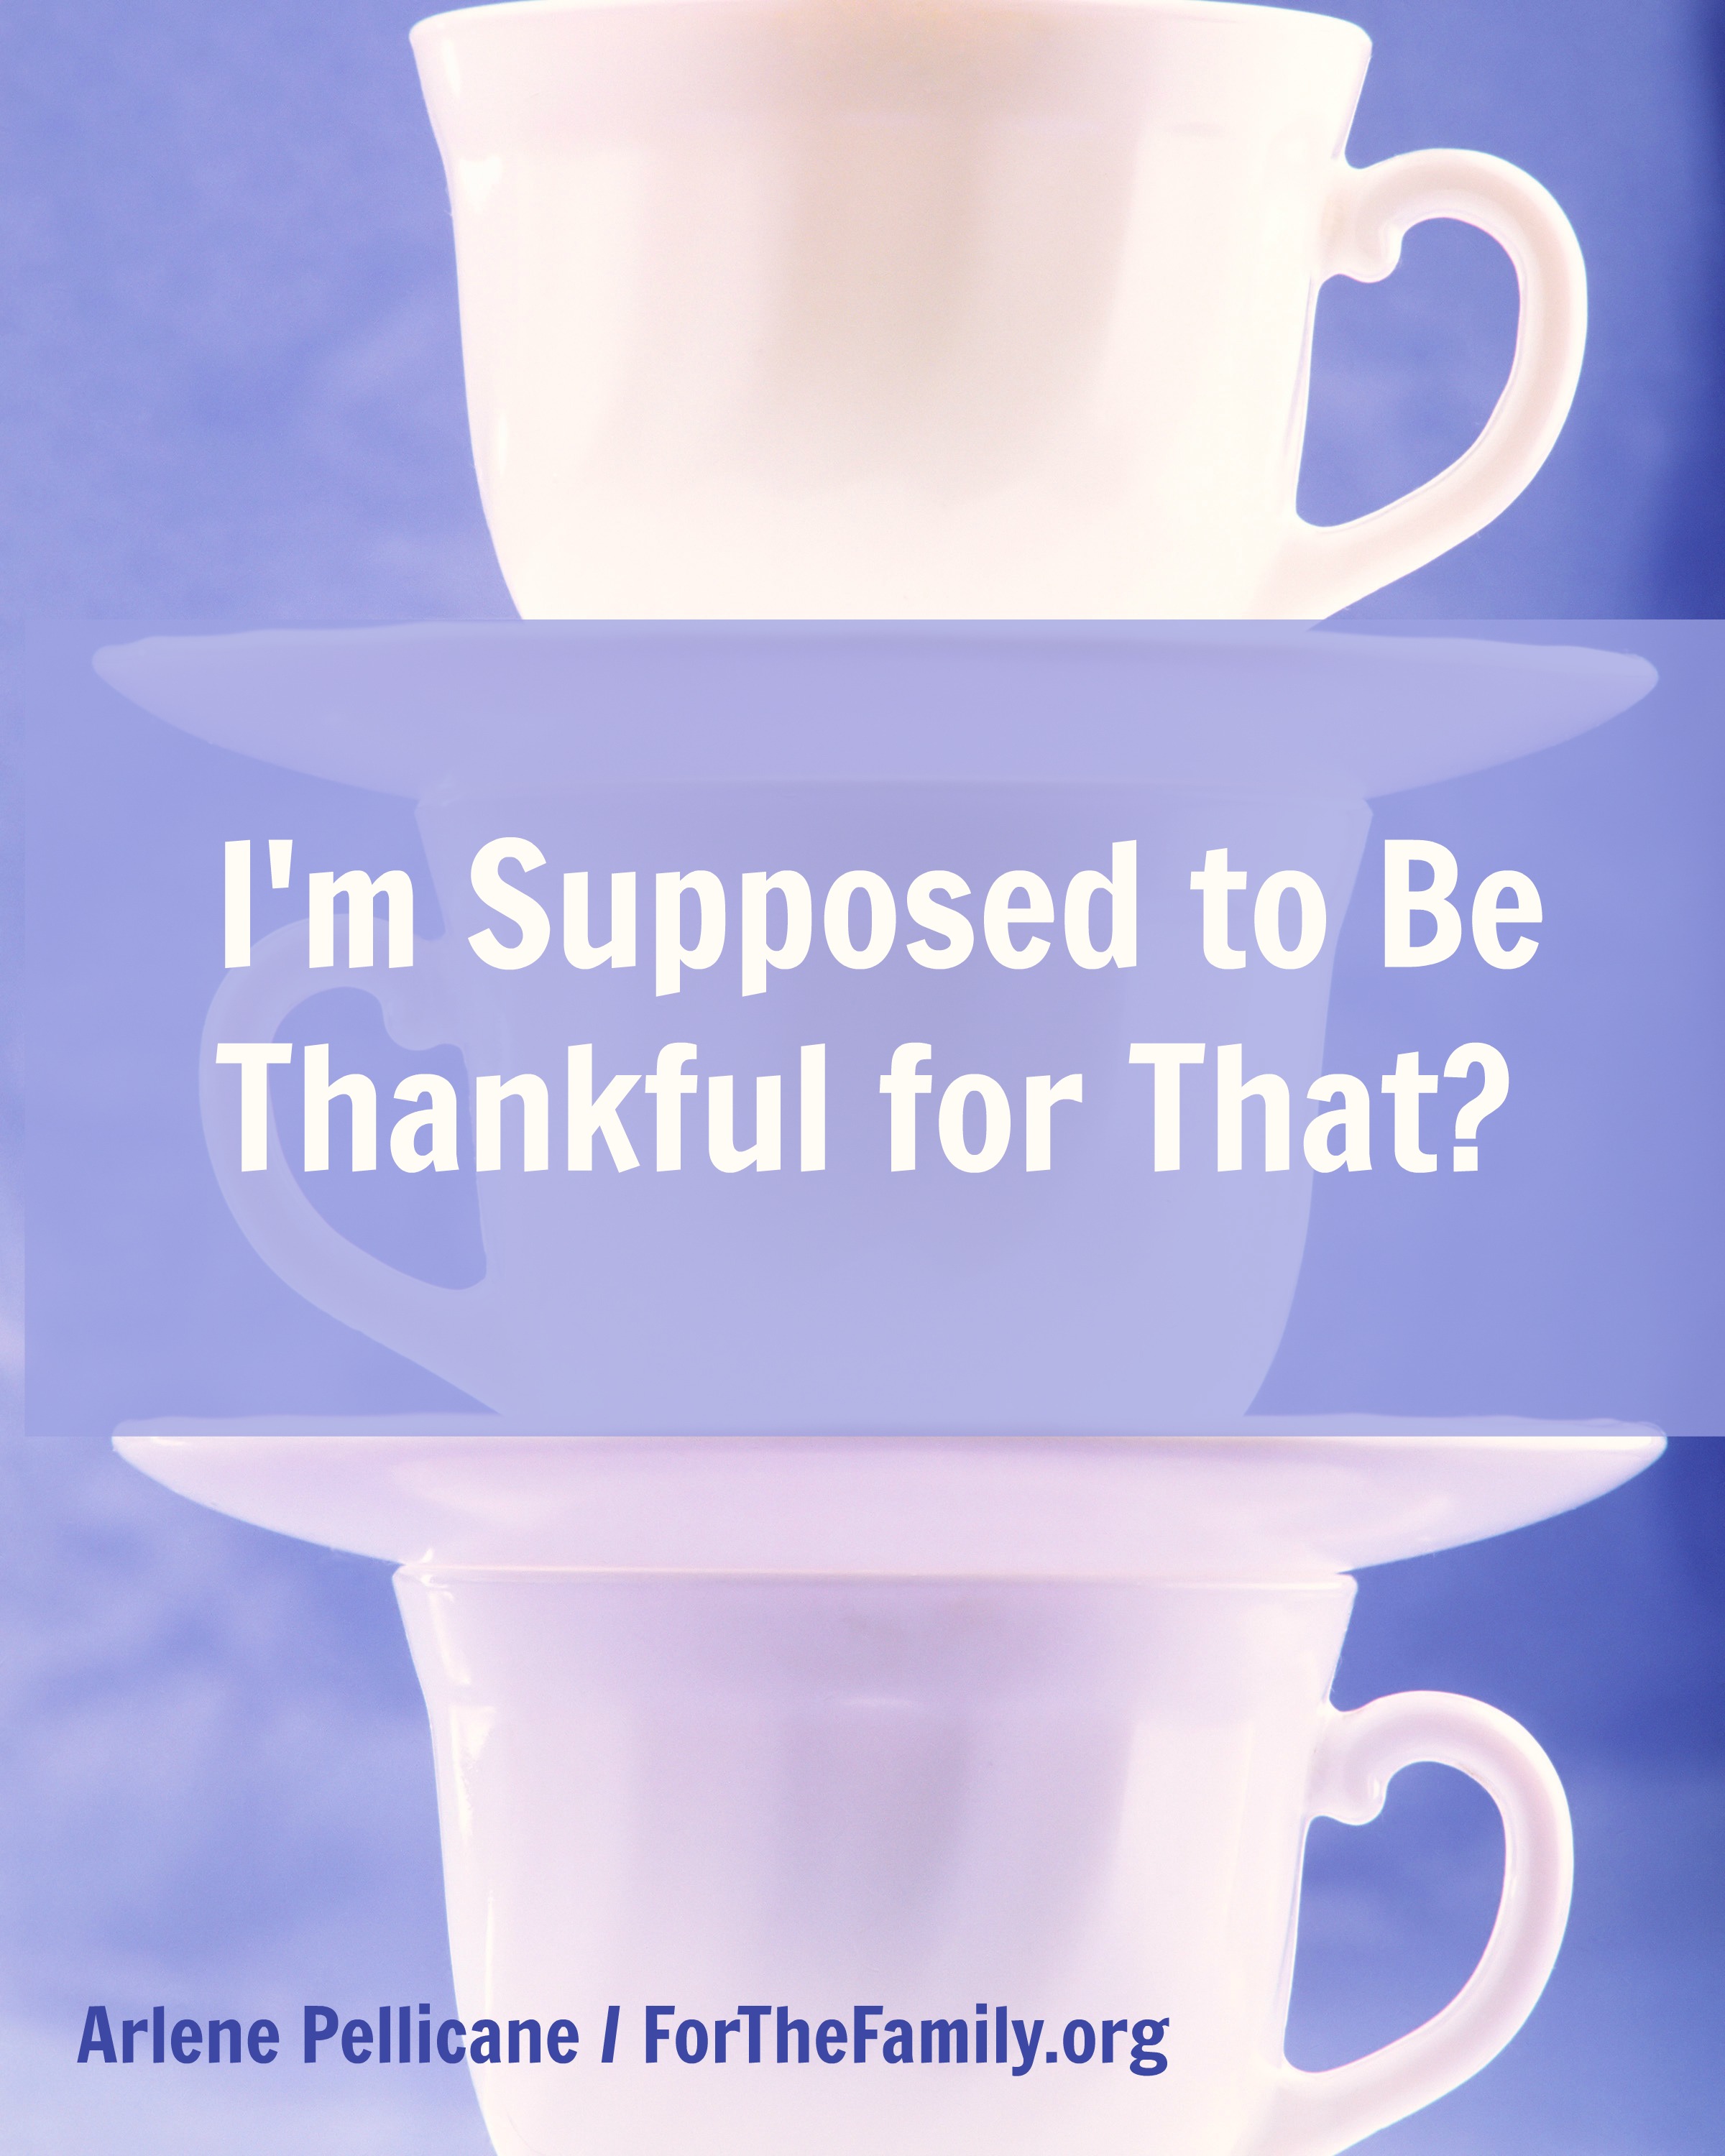 I’m Supposed to Be Thankful for That?